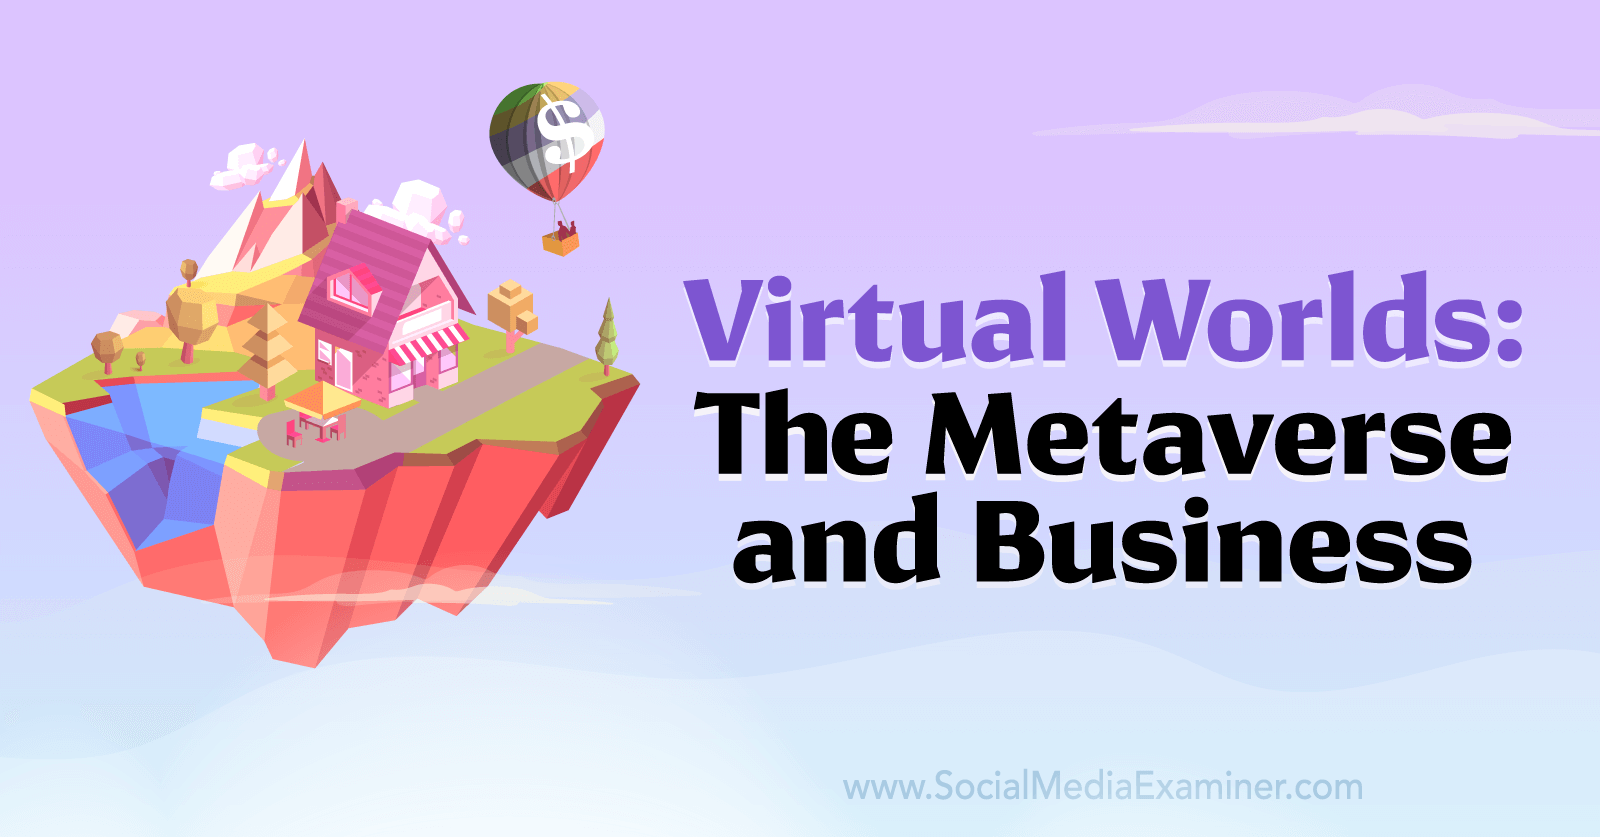 Virtual Worlds: The Metaverse and Business-Social Media Examiner